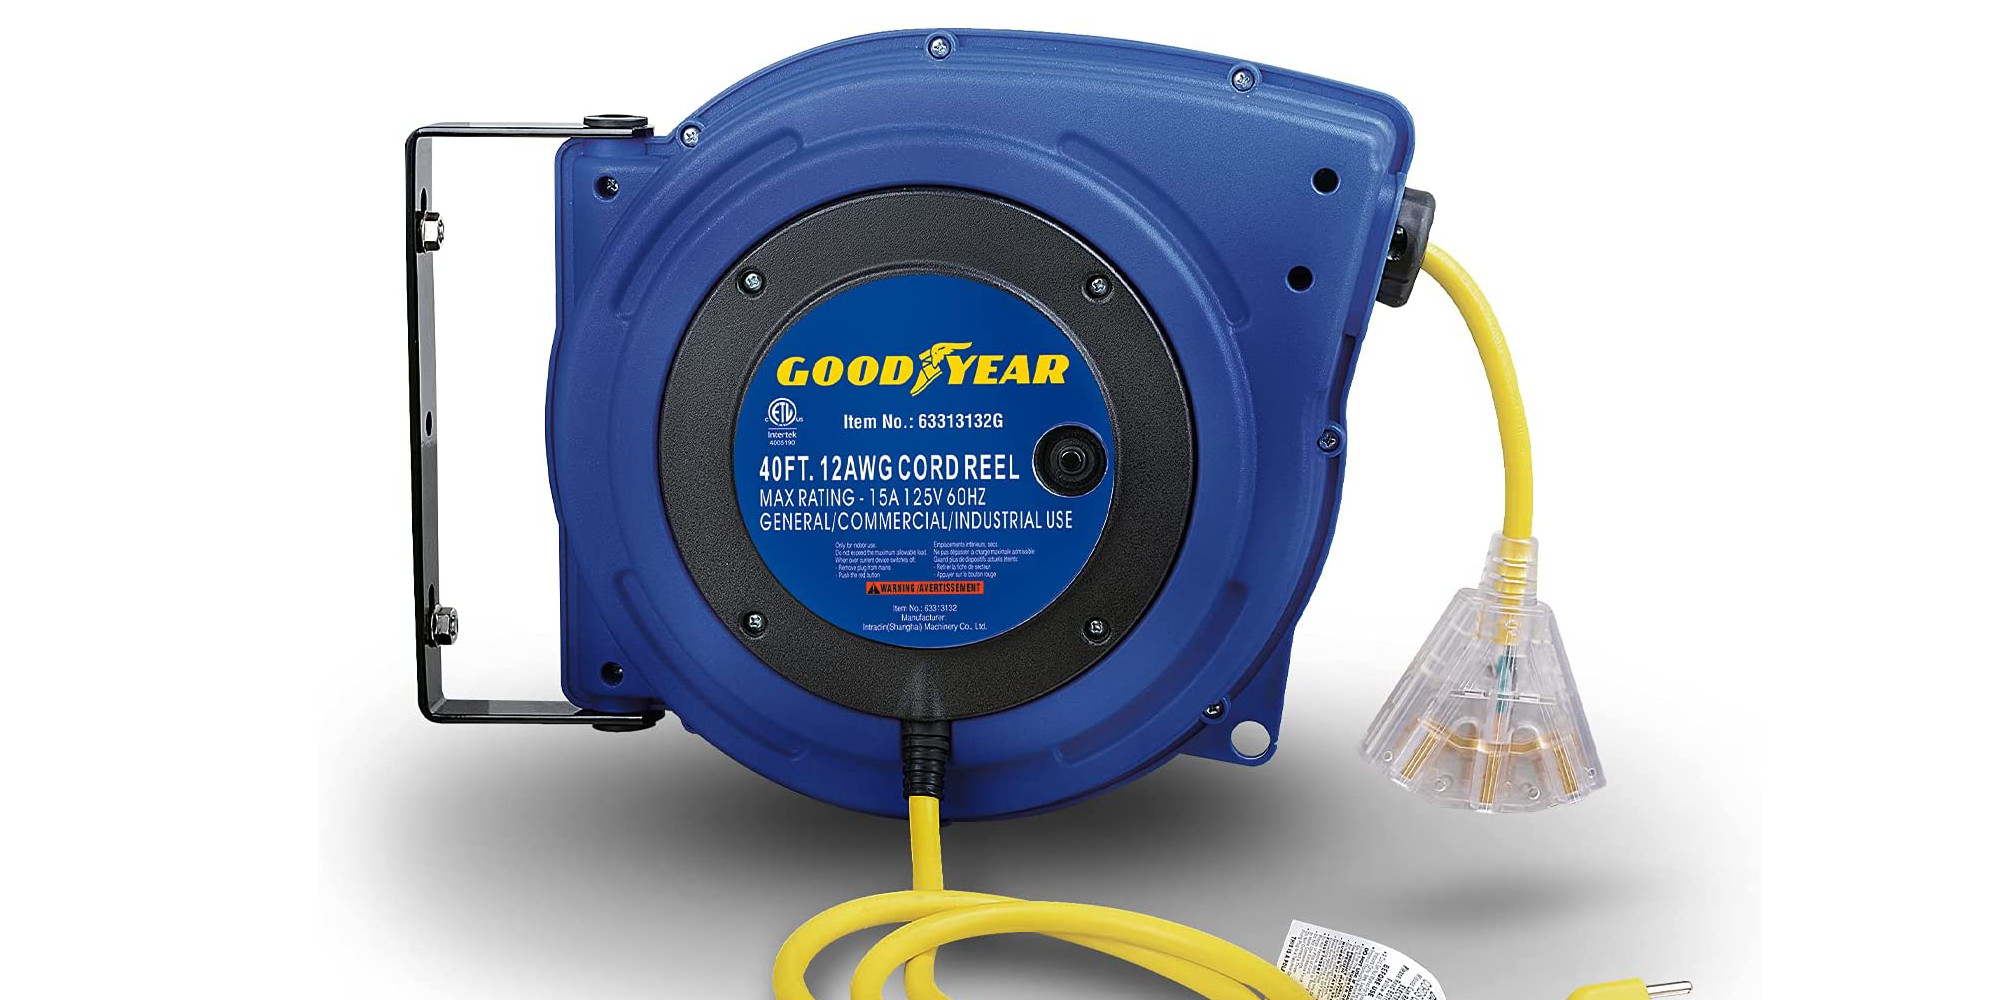 Goodyear 40-ft. Extension Cord Reel $116.50 (Reg. $160) + more from $44 in  today's Gold Box